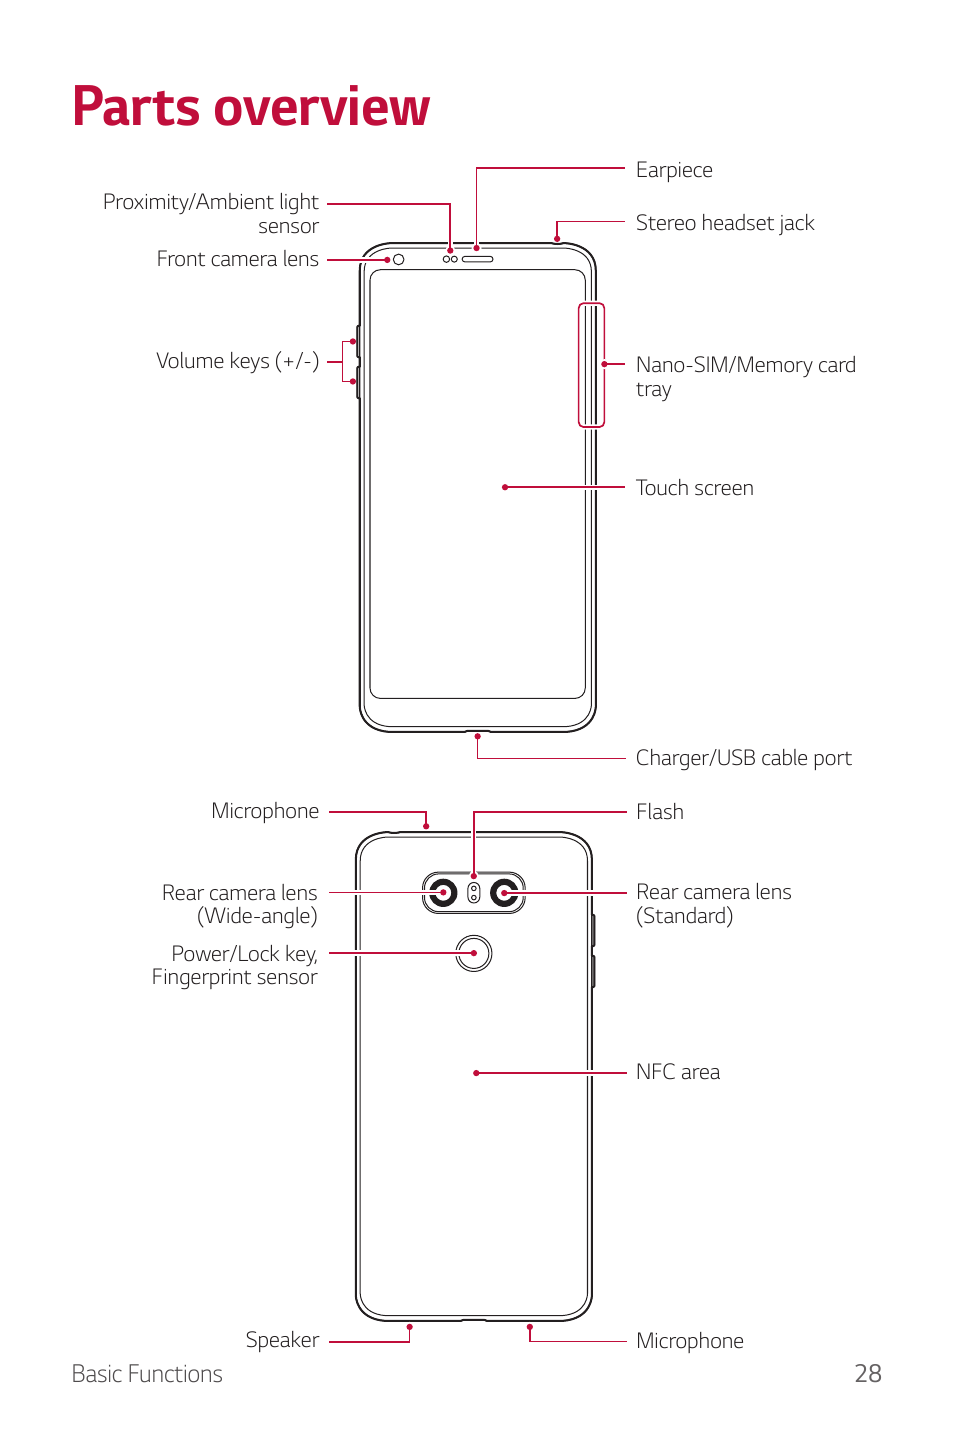 Parts overview | LG G6 H872 User Manual | Page 29 / 183